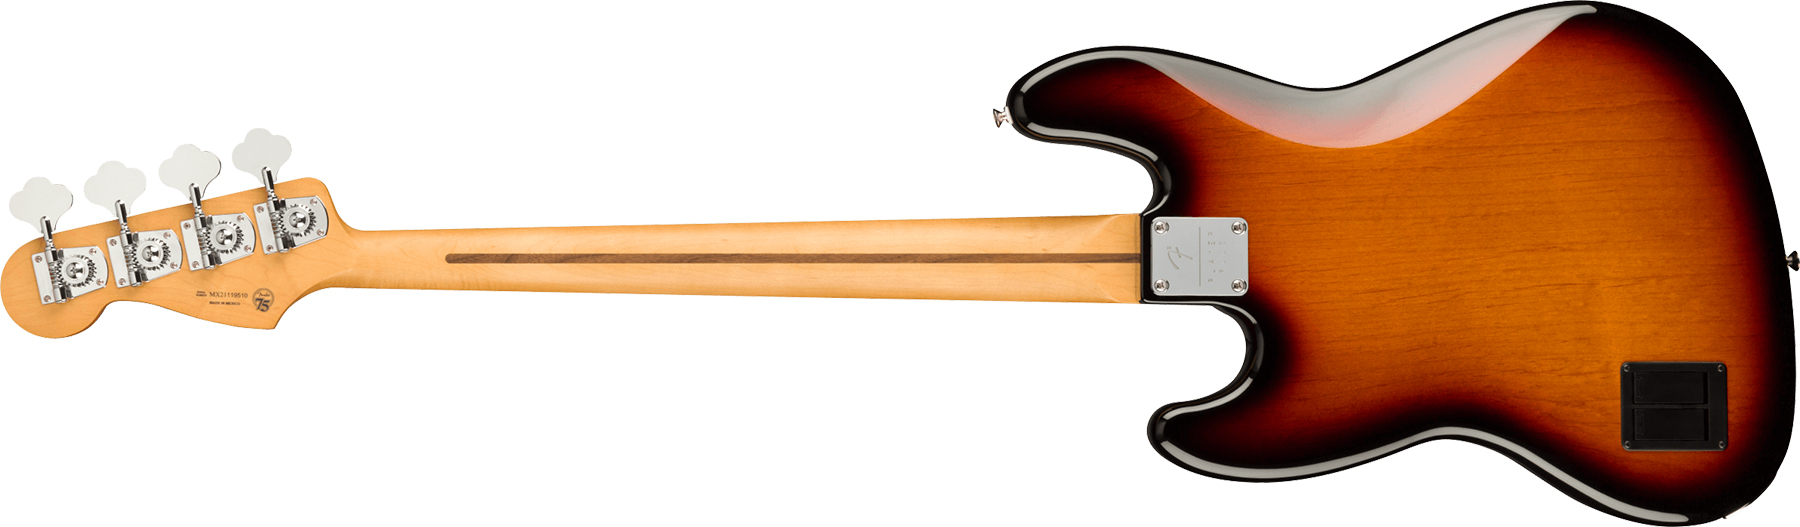 Fender Jazz Bass Player Plus Mex Active Pf - 3-color Sunburst - Solid body electric bass - Variation 1